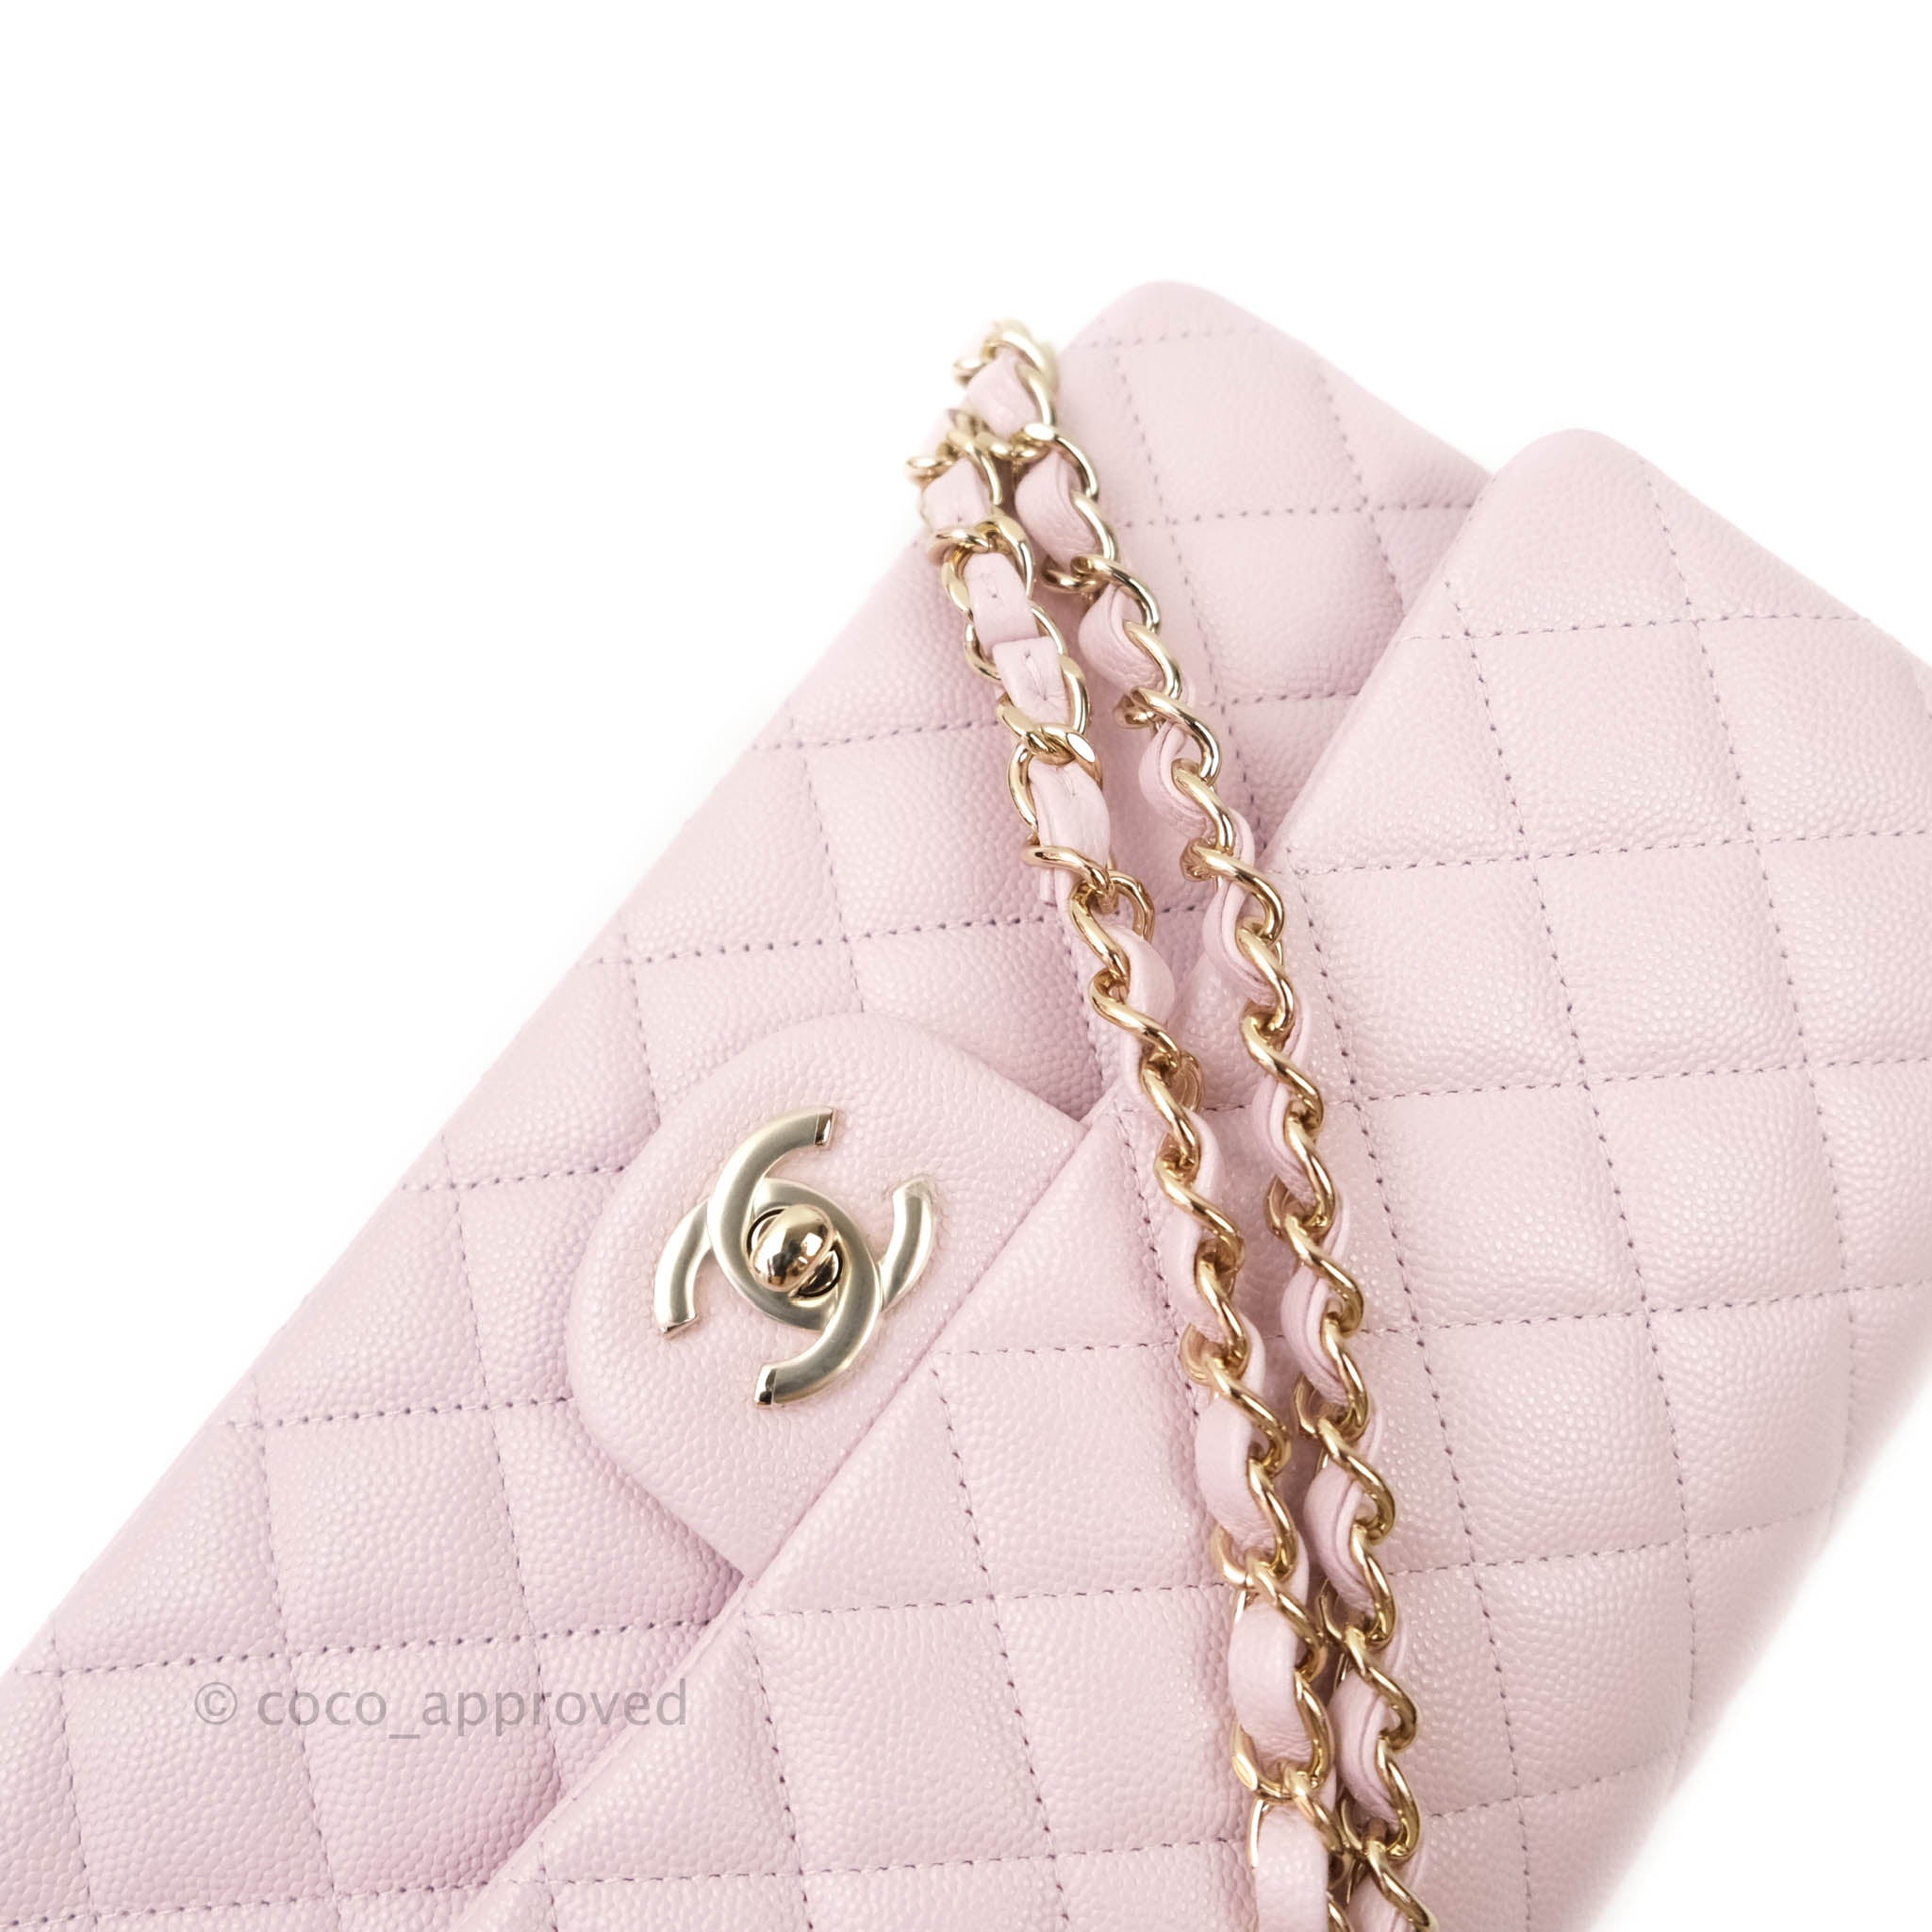 chanel pink classic bag